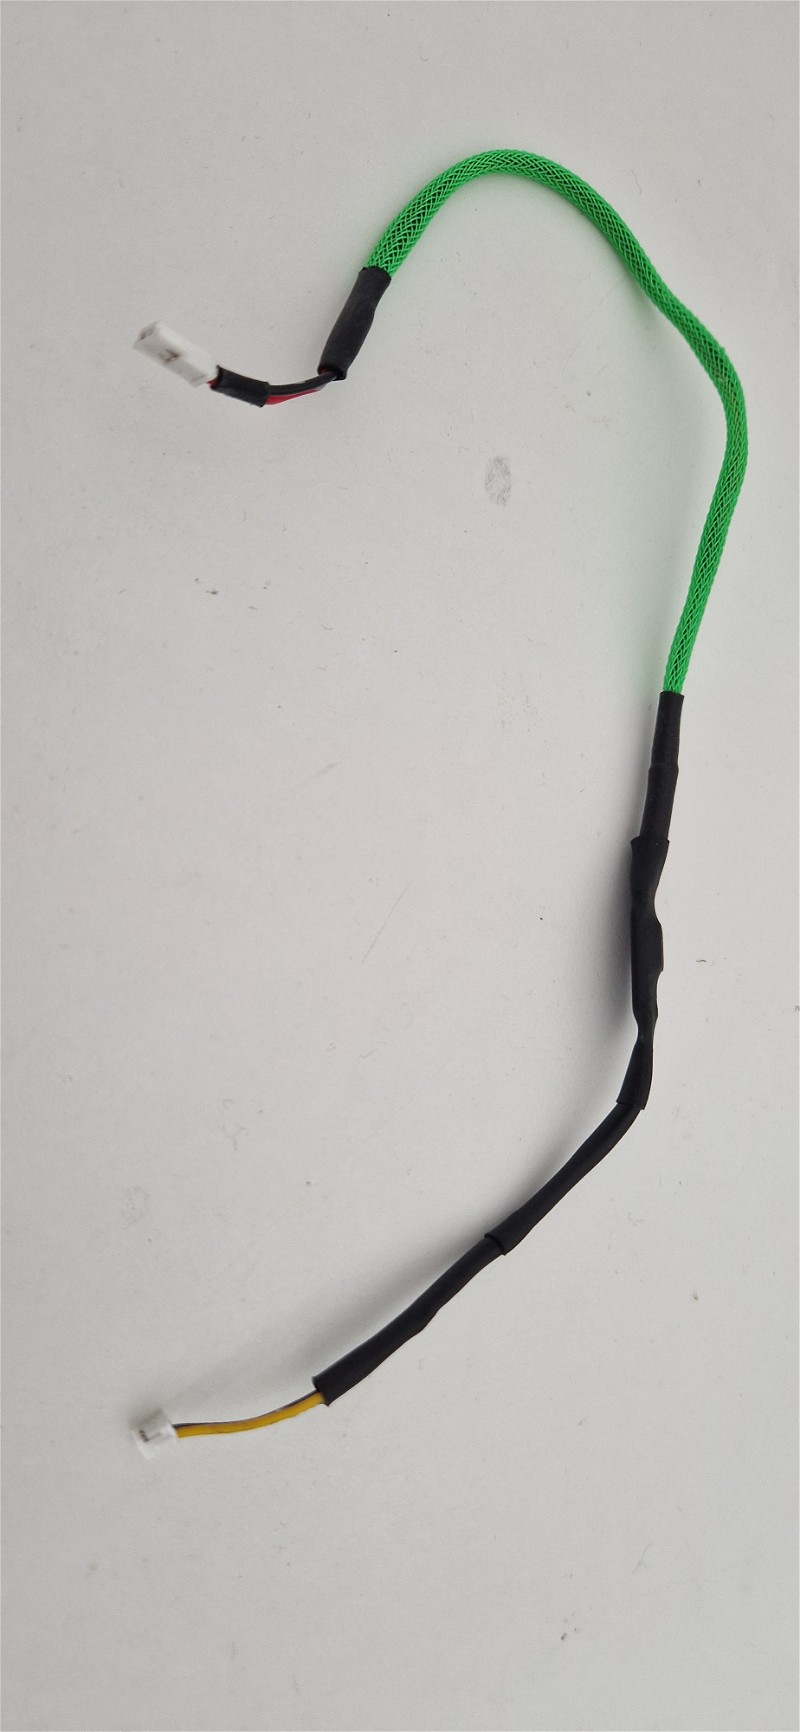 Image 1 for Maxx Hopup Led tracer cable voor Hpa Fcu